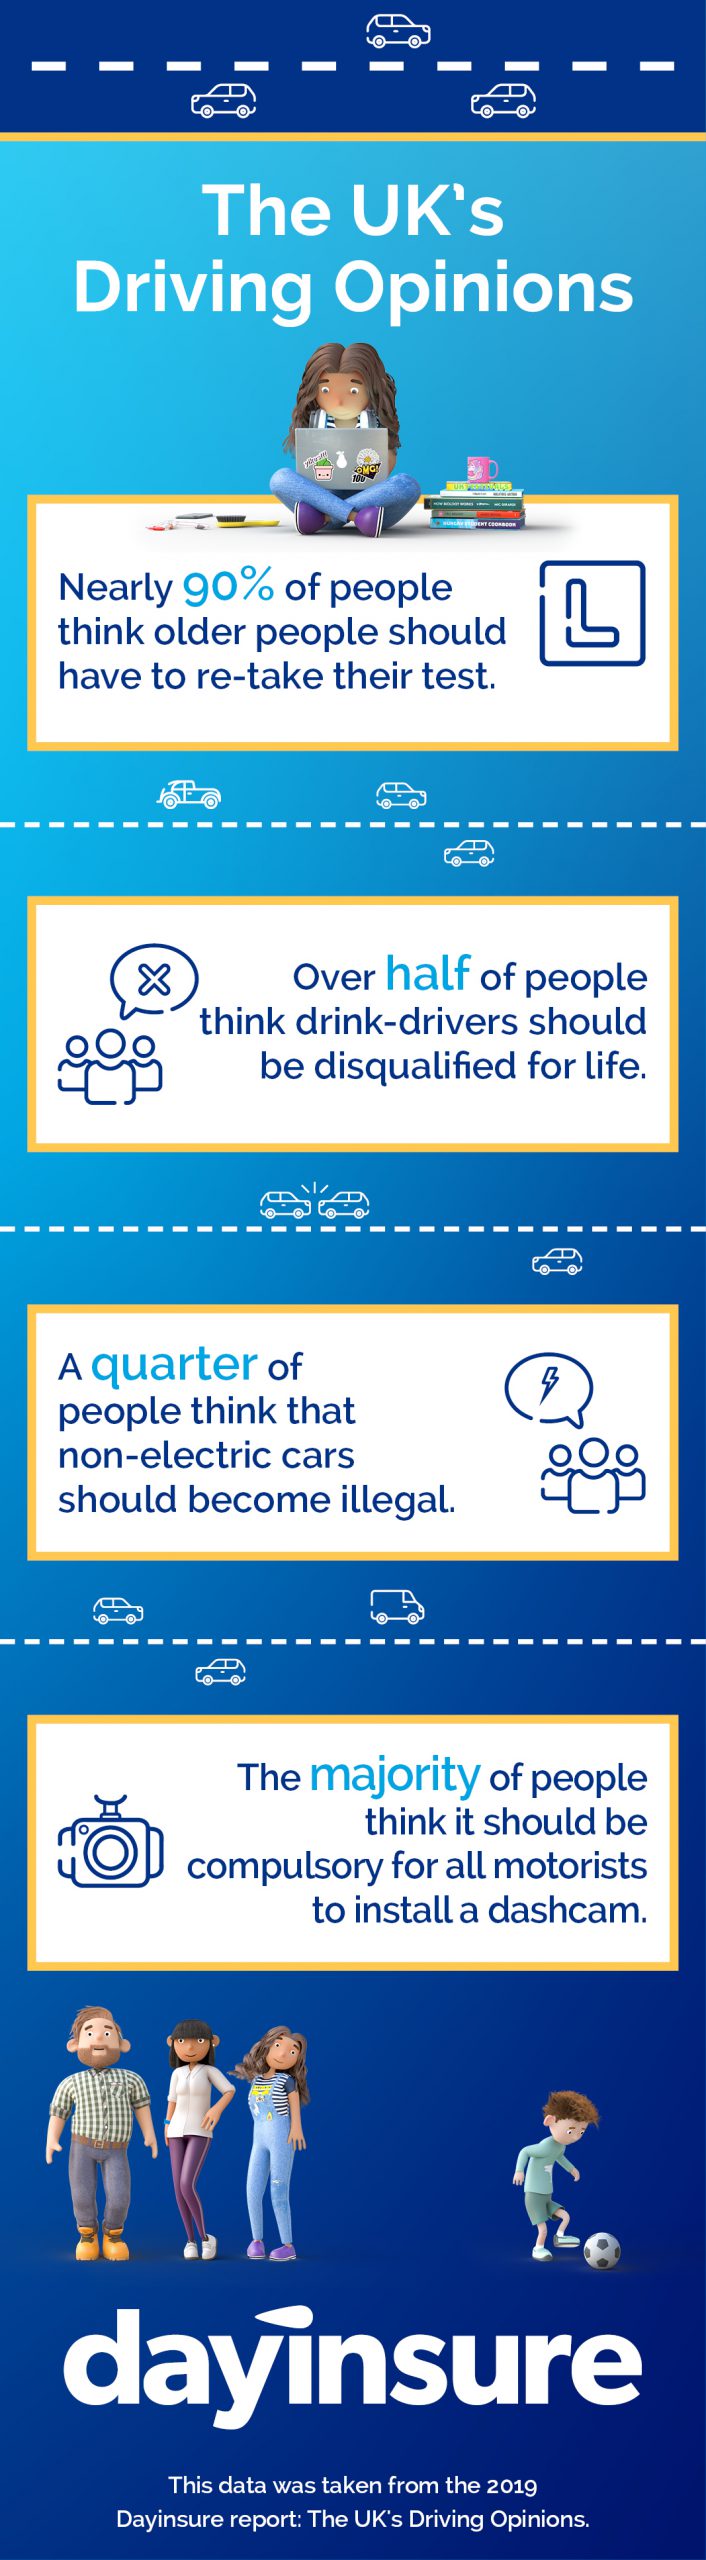 The UK's Driving Opinion Infographic - Dayinsure